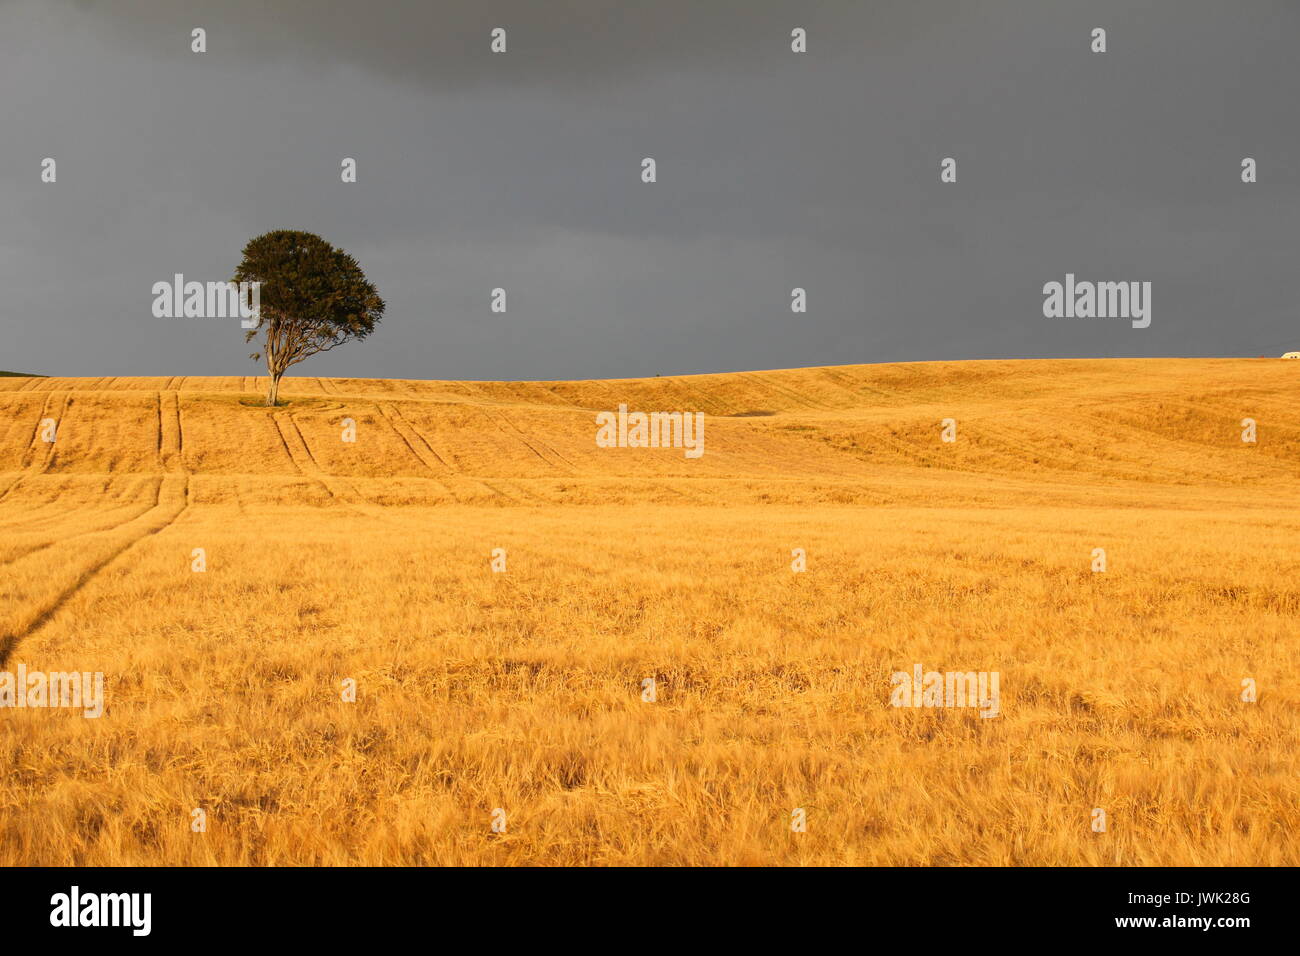 A scenic view of a lone tree in a barley field. Stock Photo